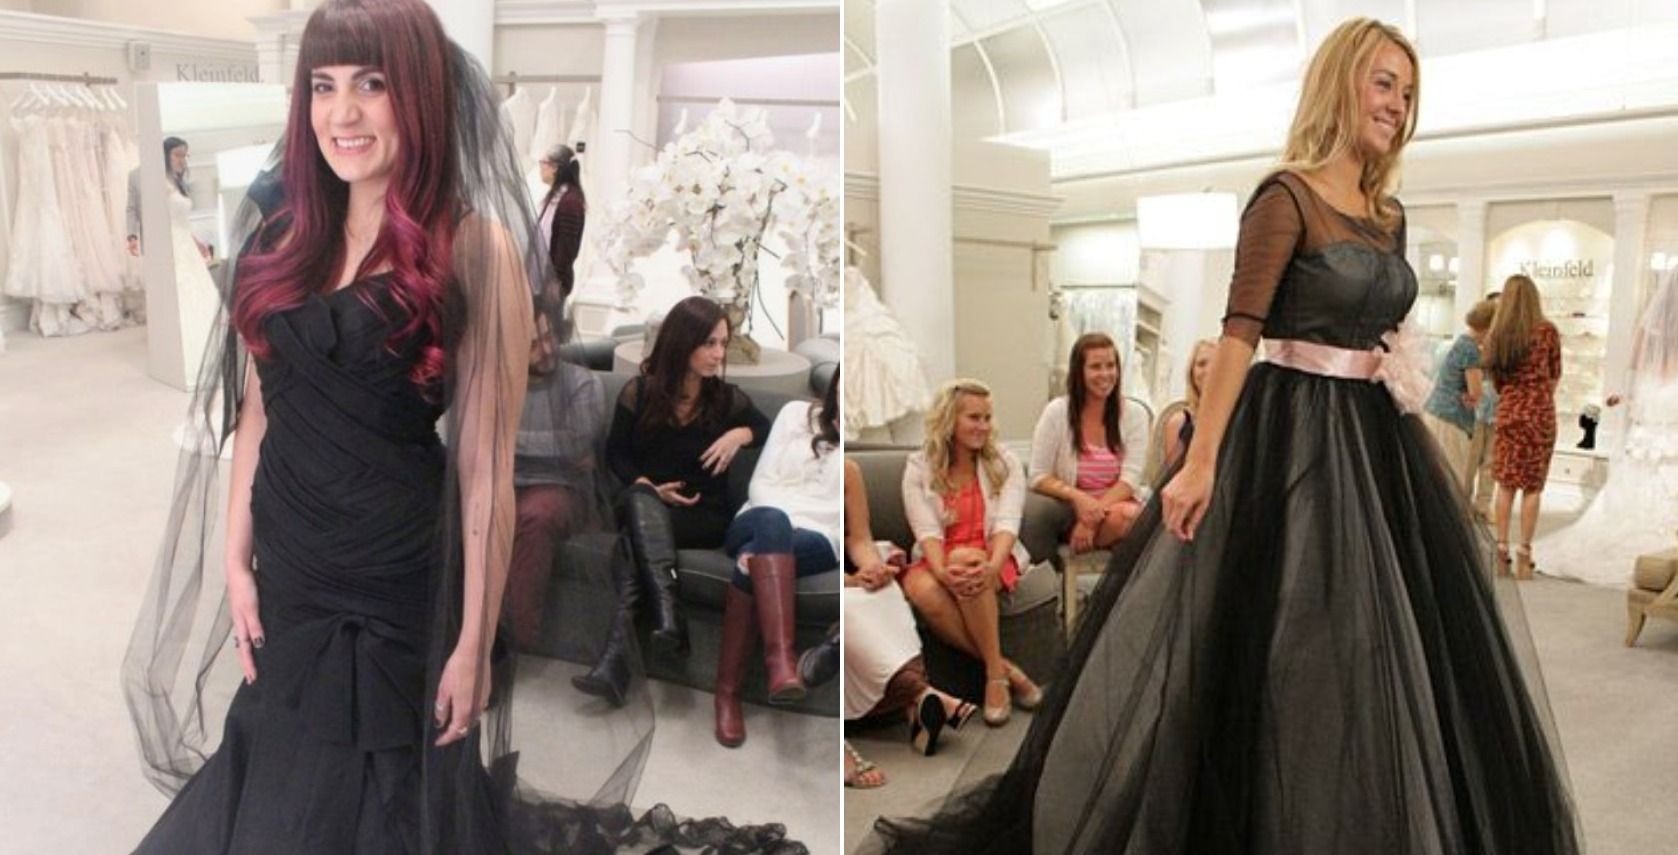 Brides wearing black dresses on &quot;Say Yes to the Dress.&quot;